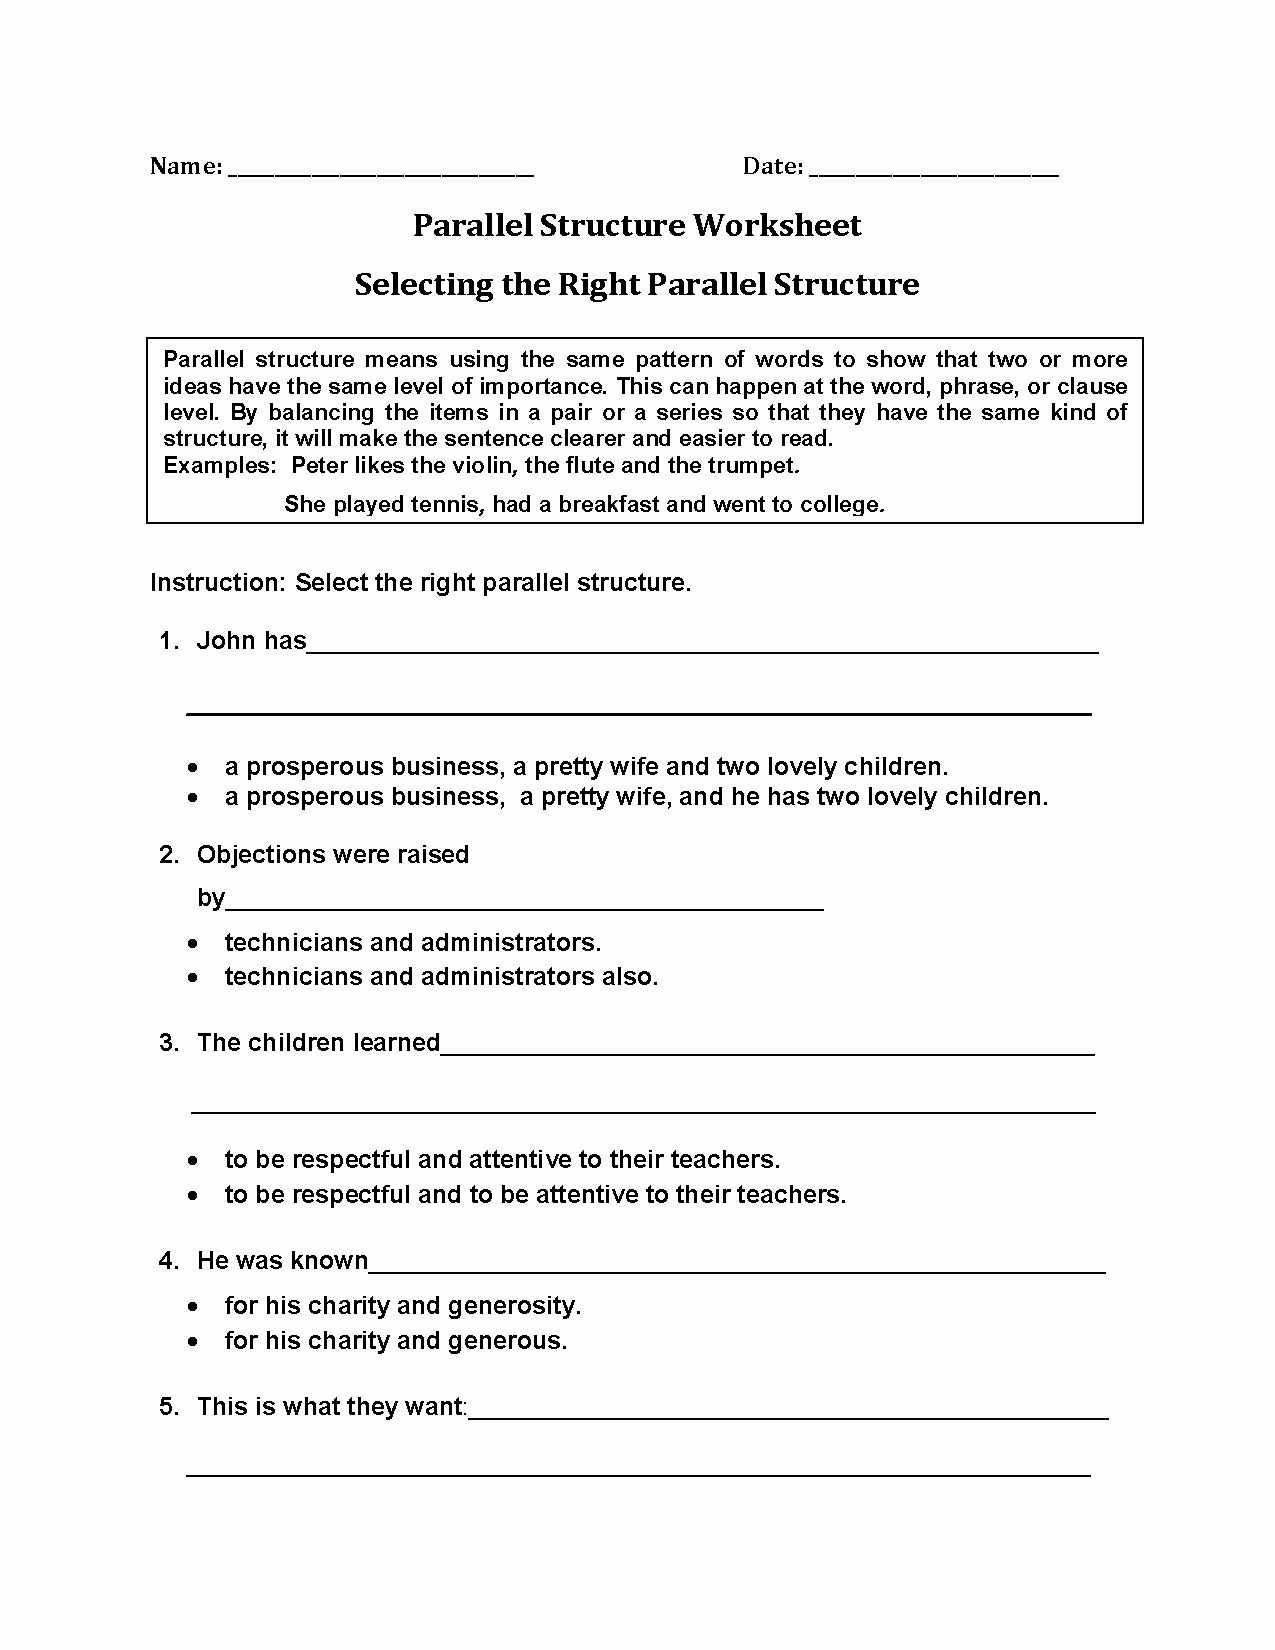 Parallel Structure Worksheet with Answers Inspirational Englishlinx